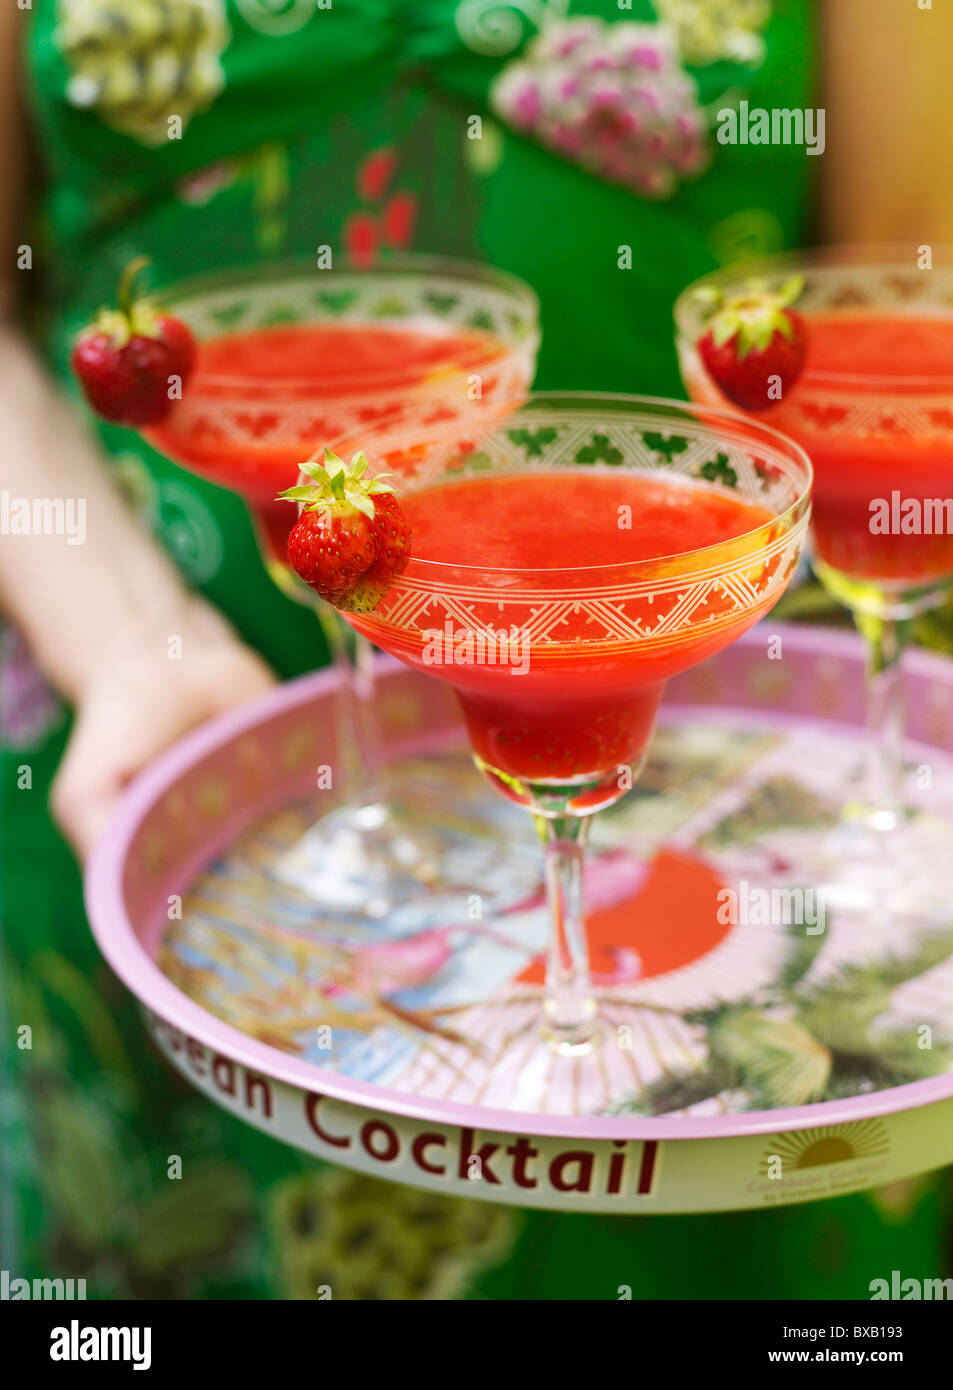 Close-up of person holding tray of strawberry drink Stock Photo